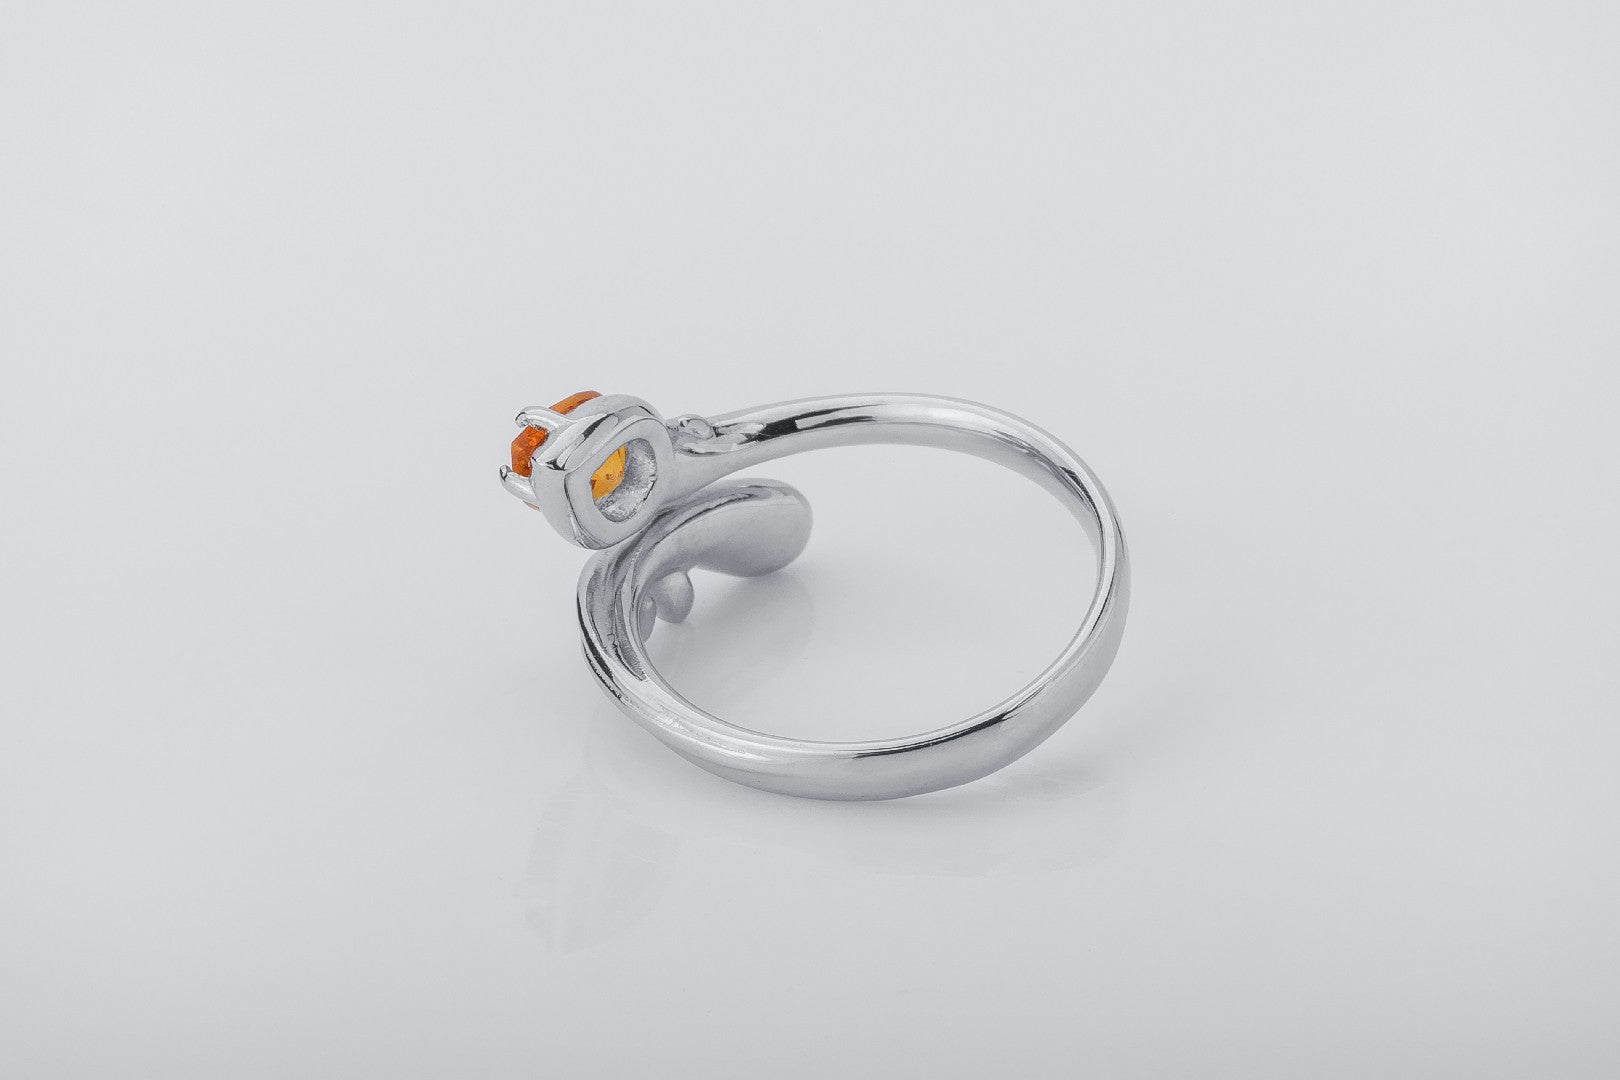 Candle Flame Citrine Ring, Rhodium plated 925 silver - vikingworkshop